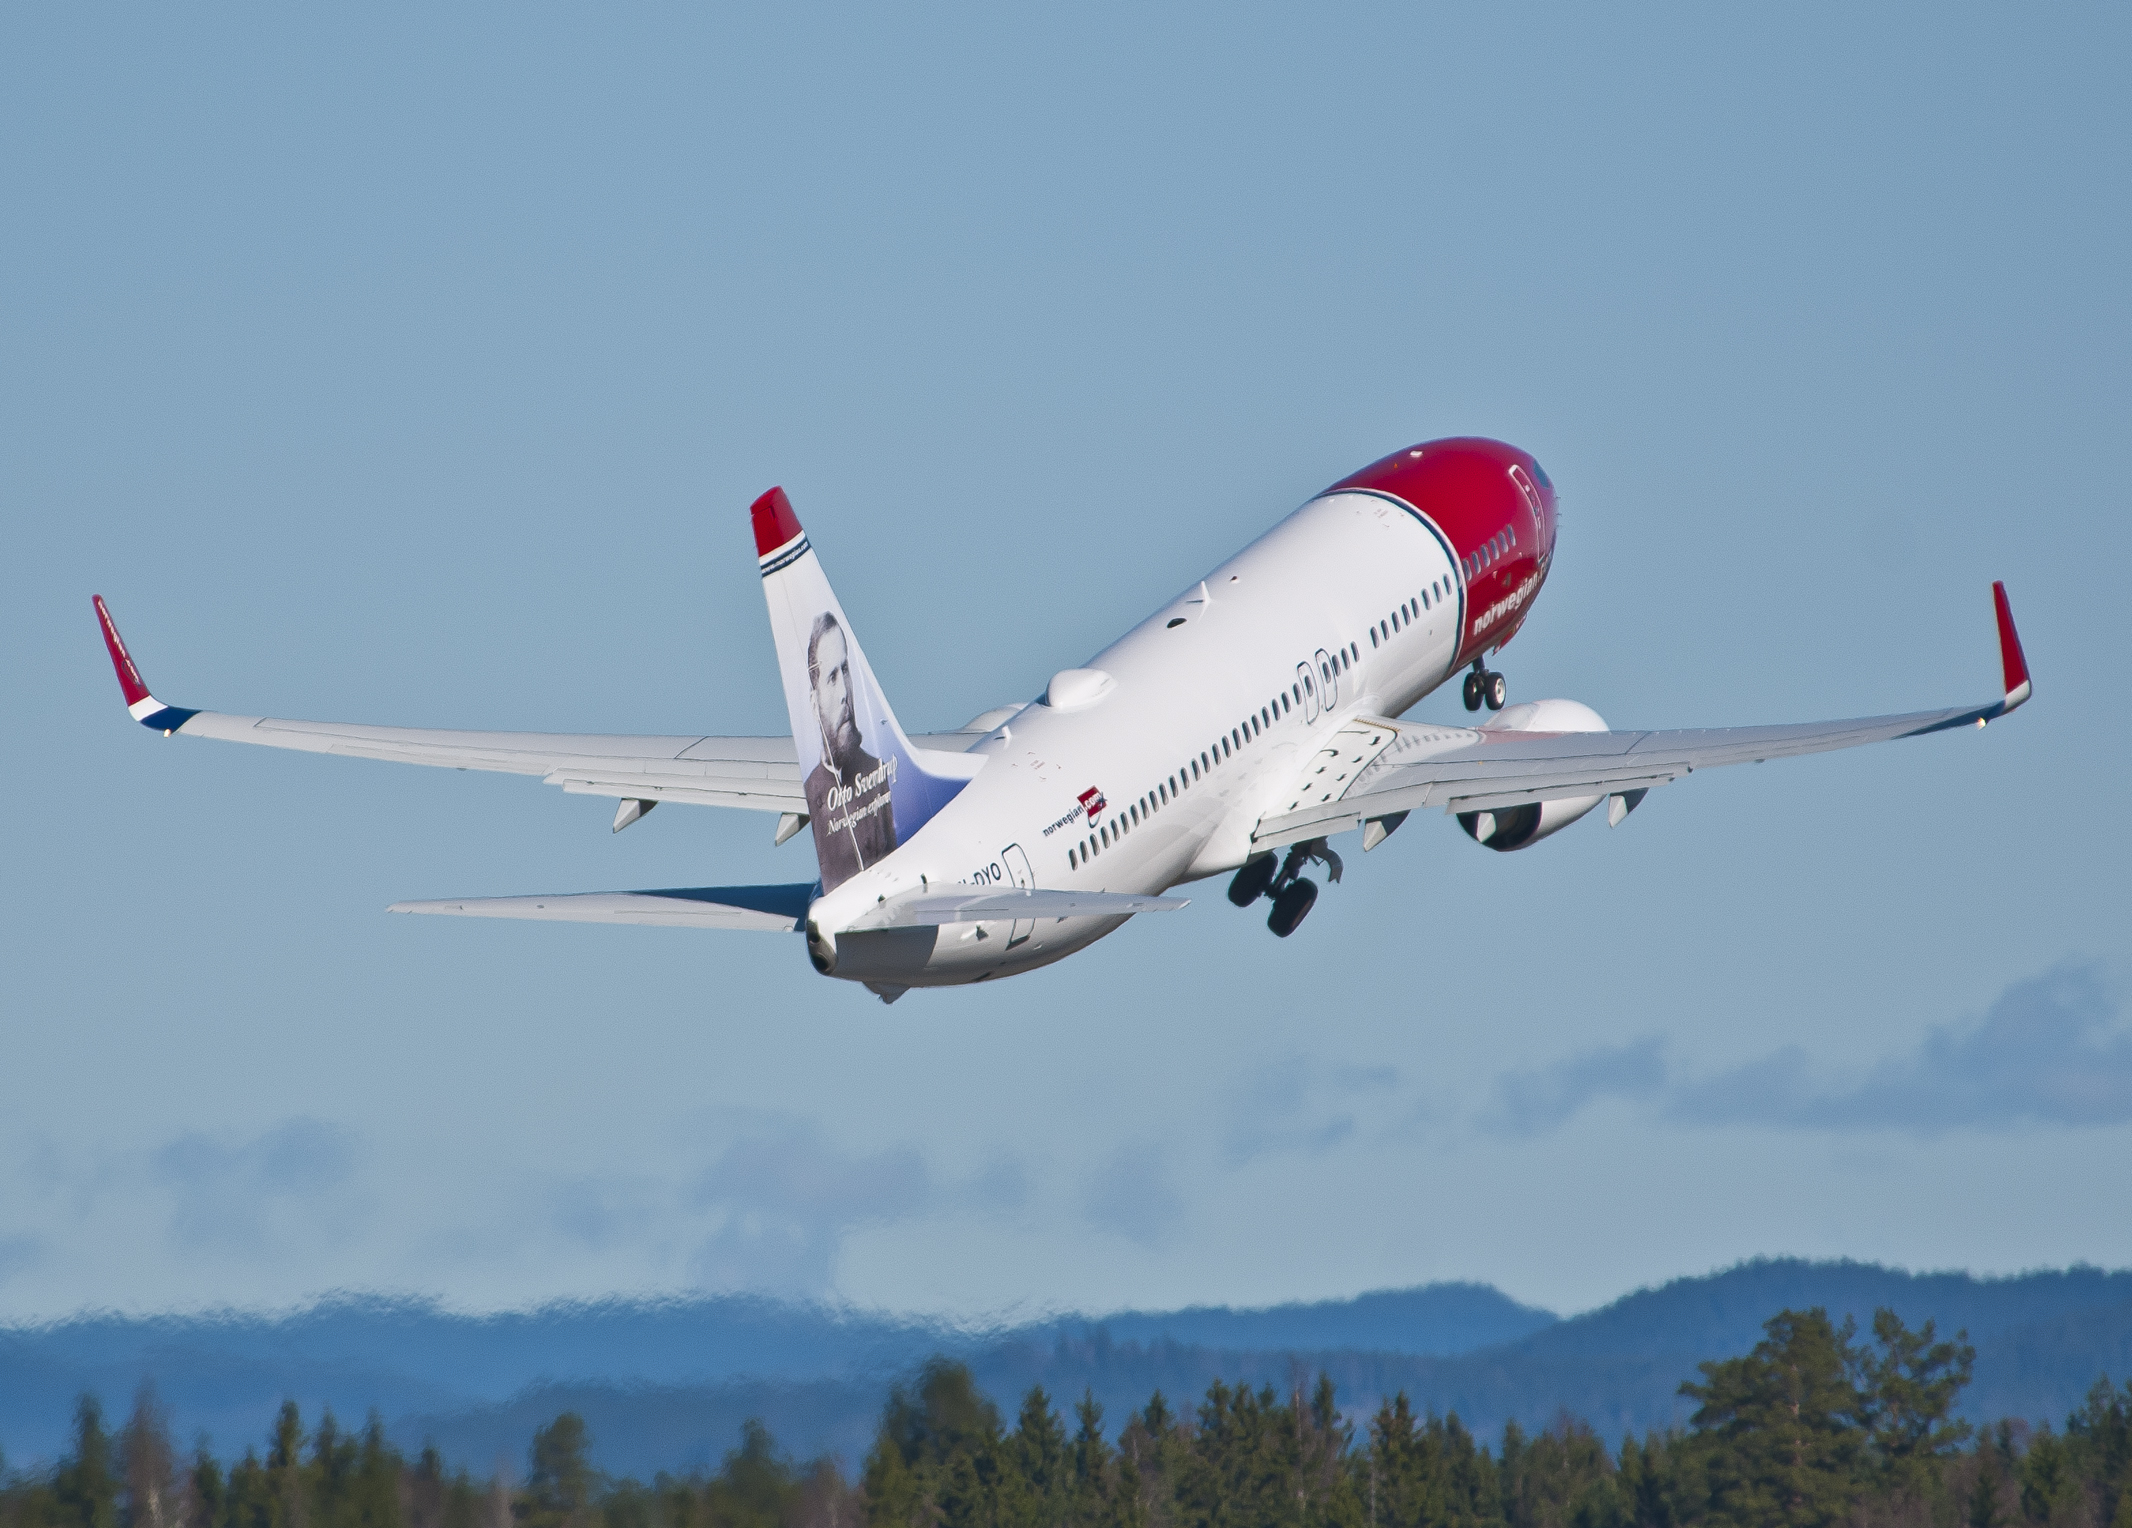 norwegian cabin baggage policy